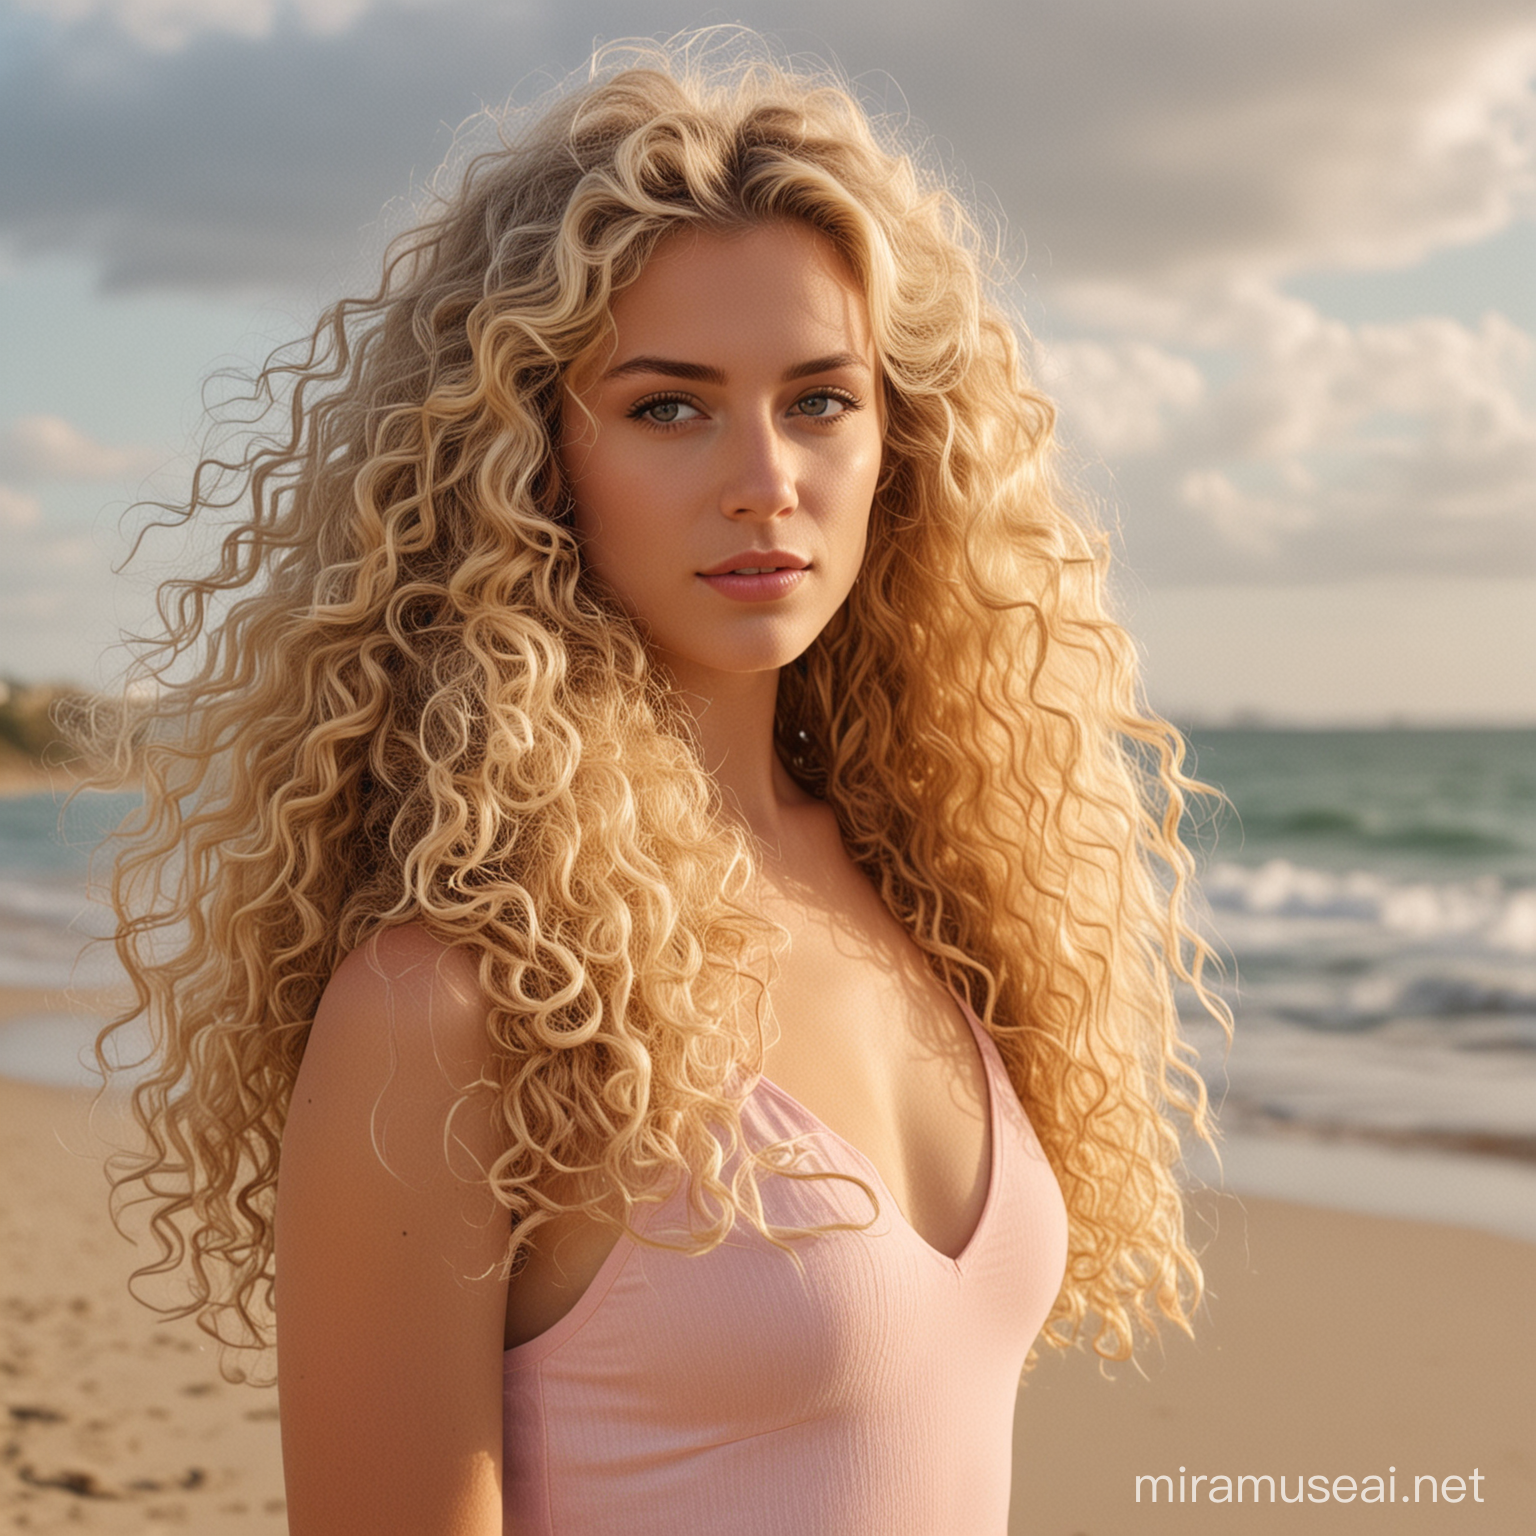 A beautiful blonde, with long, curly hair, 80's style, standing on a beach